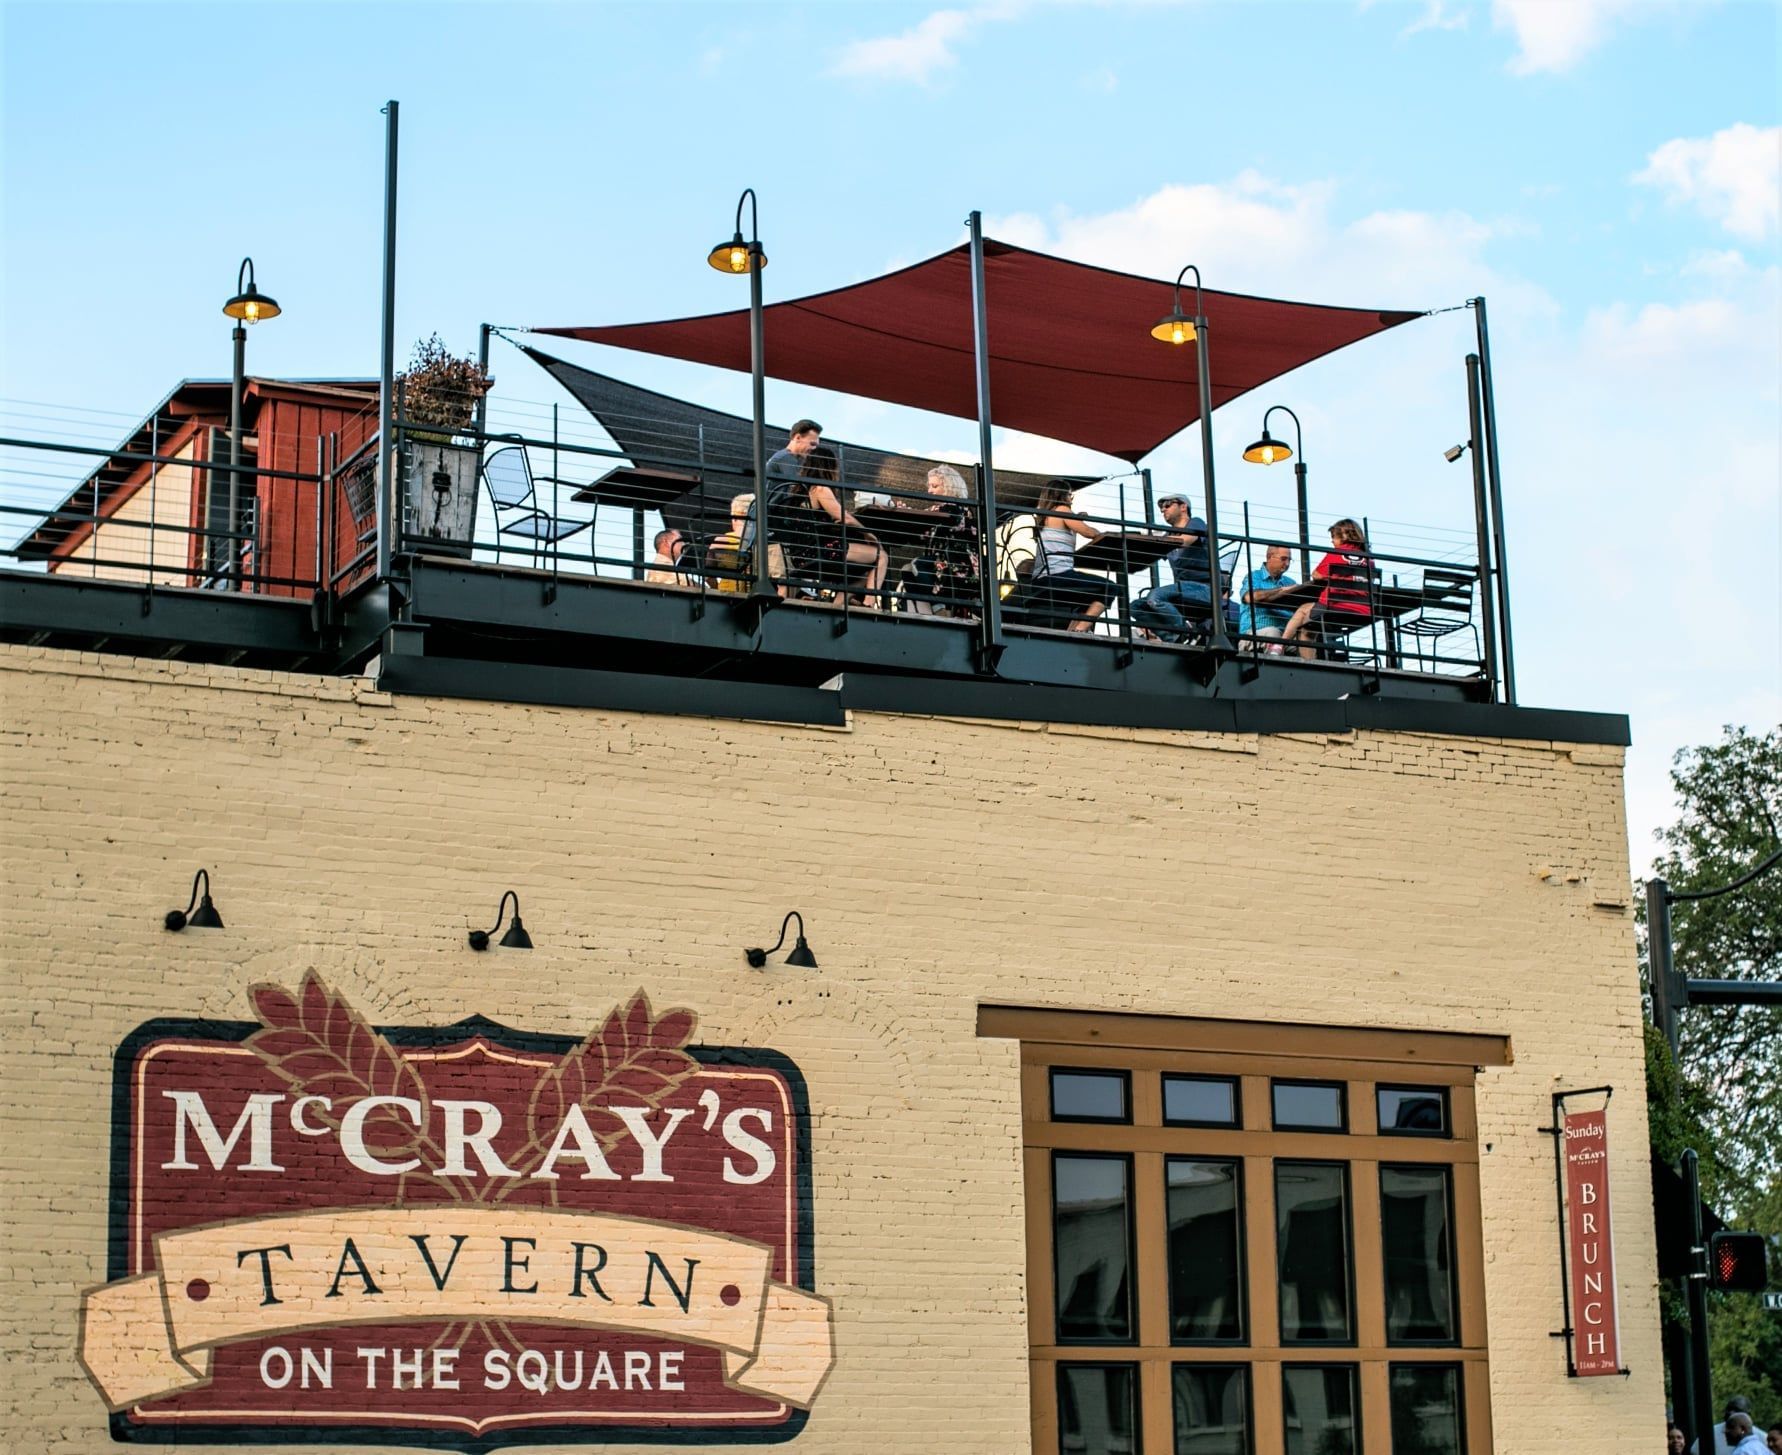 Roof-top Brunch Lawrenceville McCray's Tavern